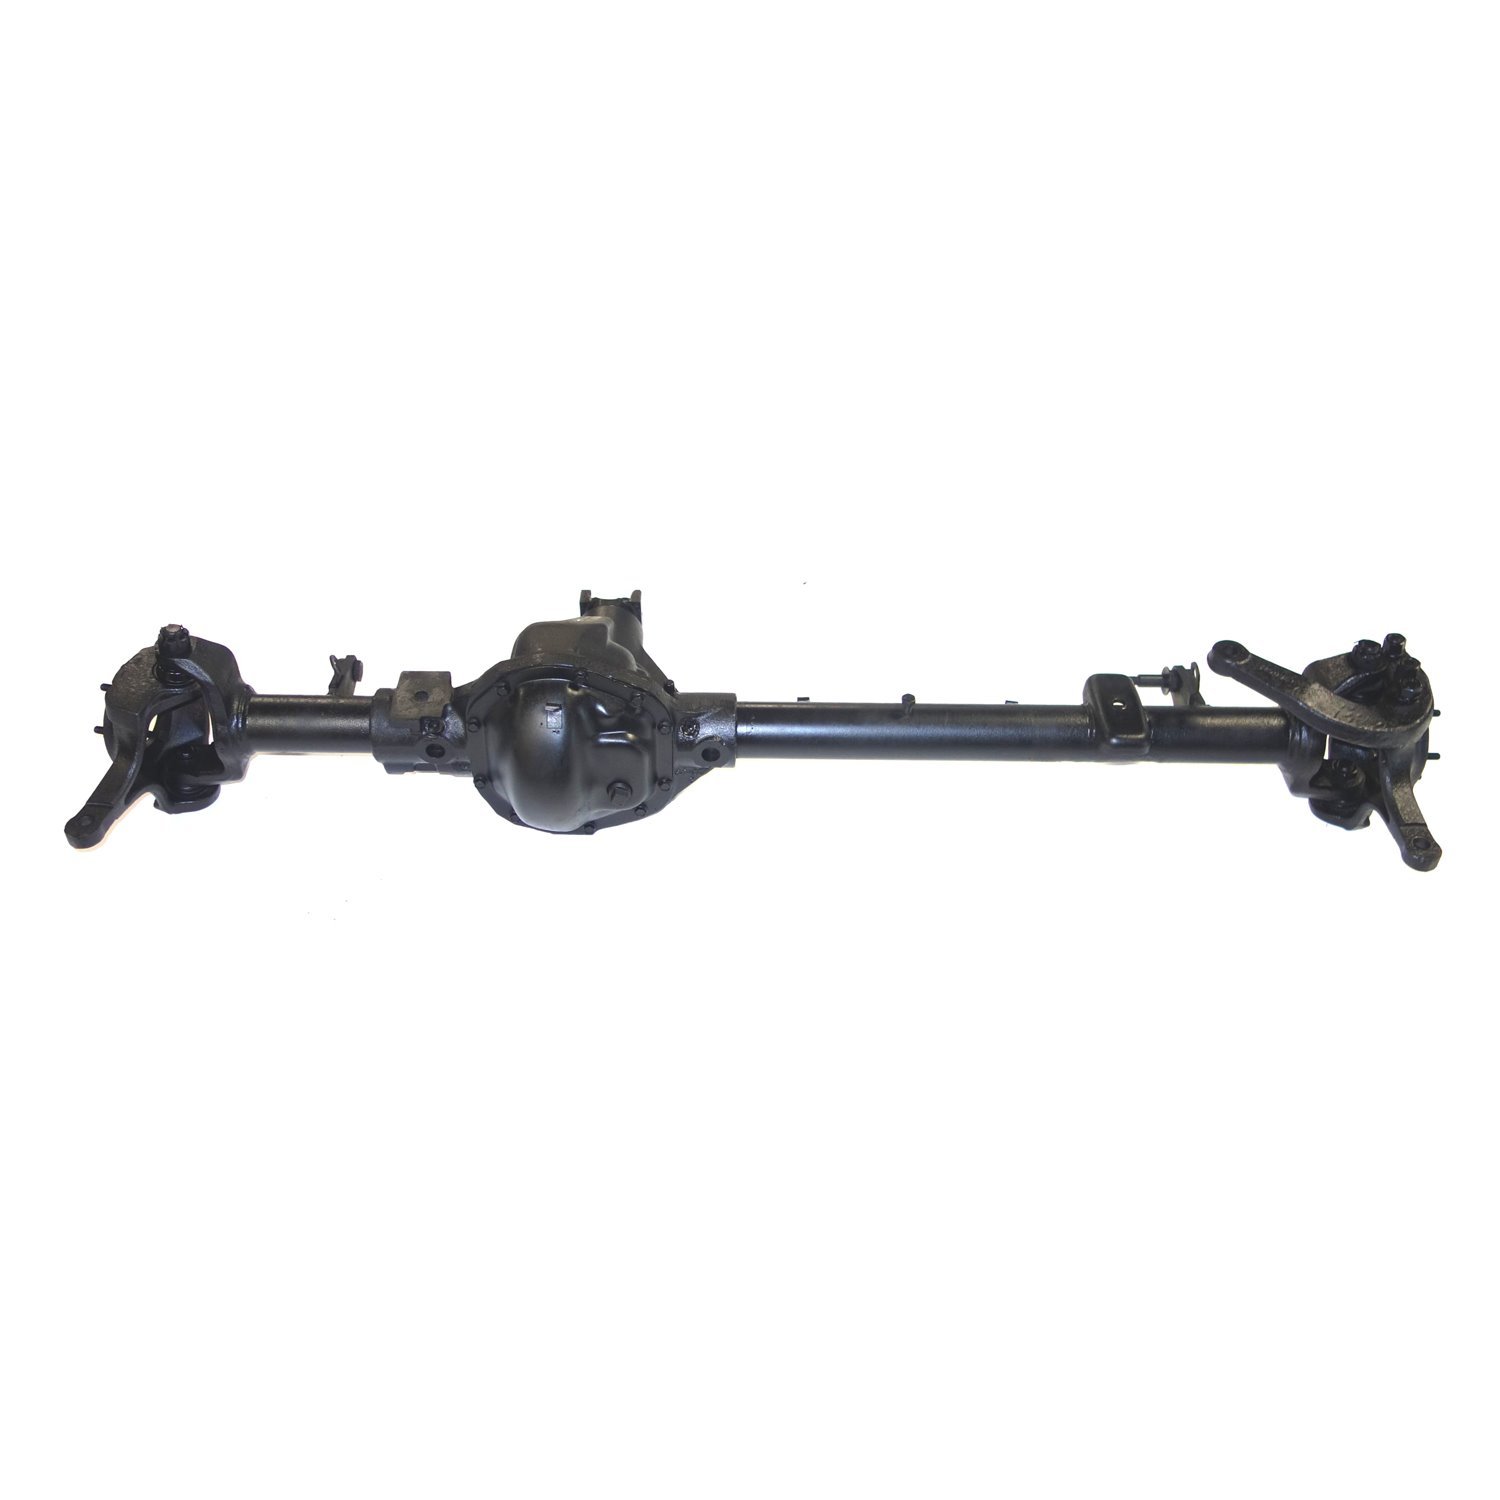 Remanufactured Complete Axle Assembly for Dana 44 1988 Dodge W250 4.11 Ratio